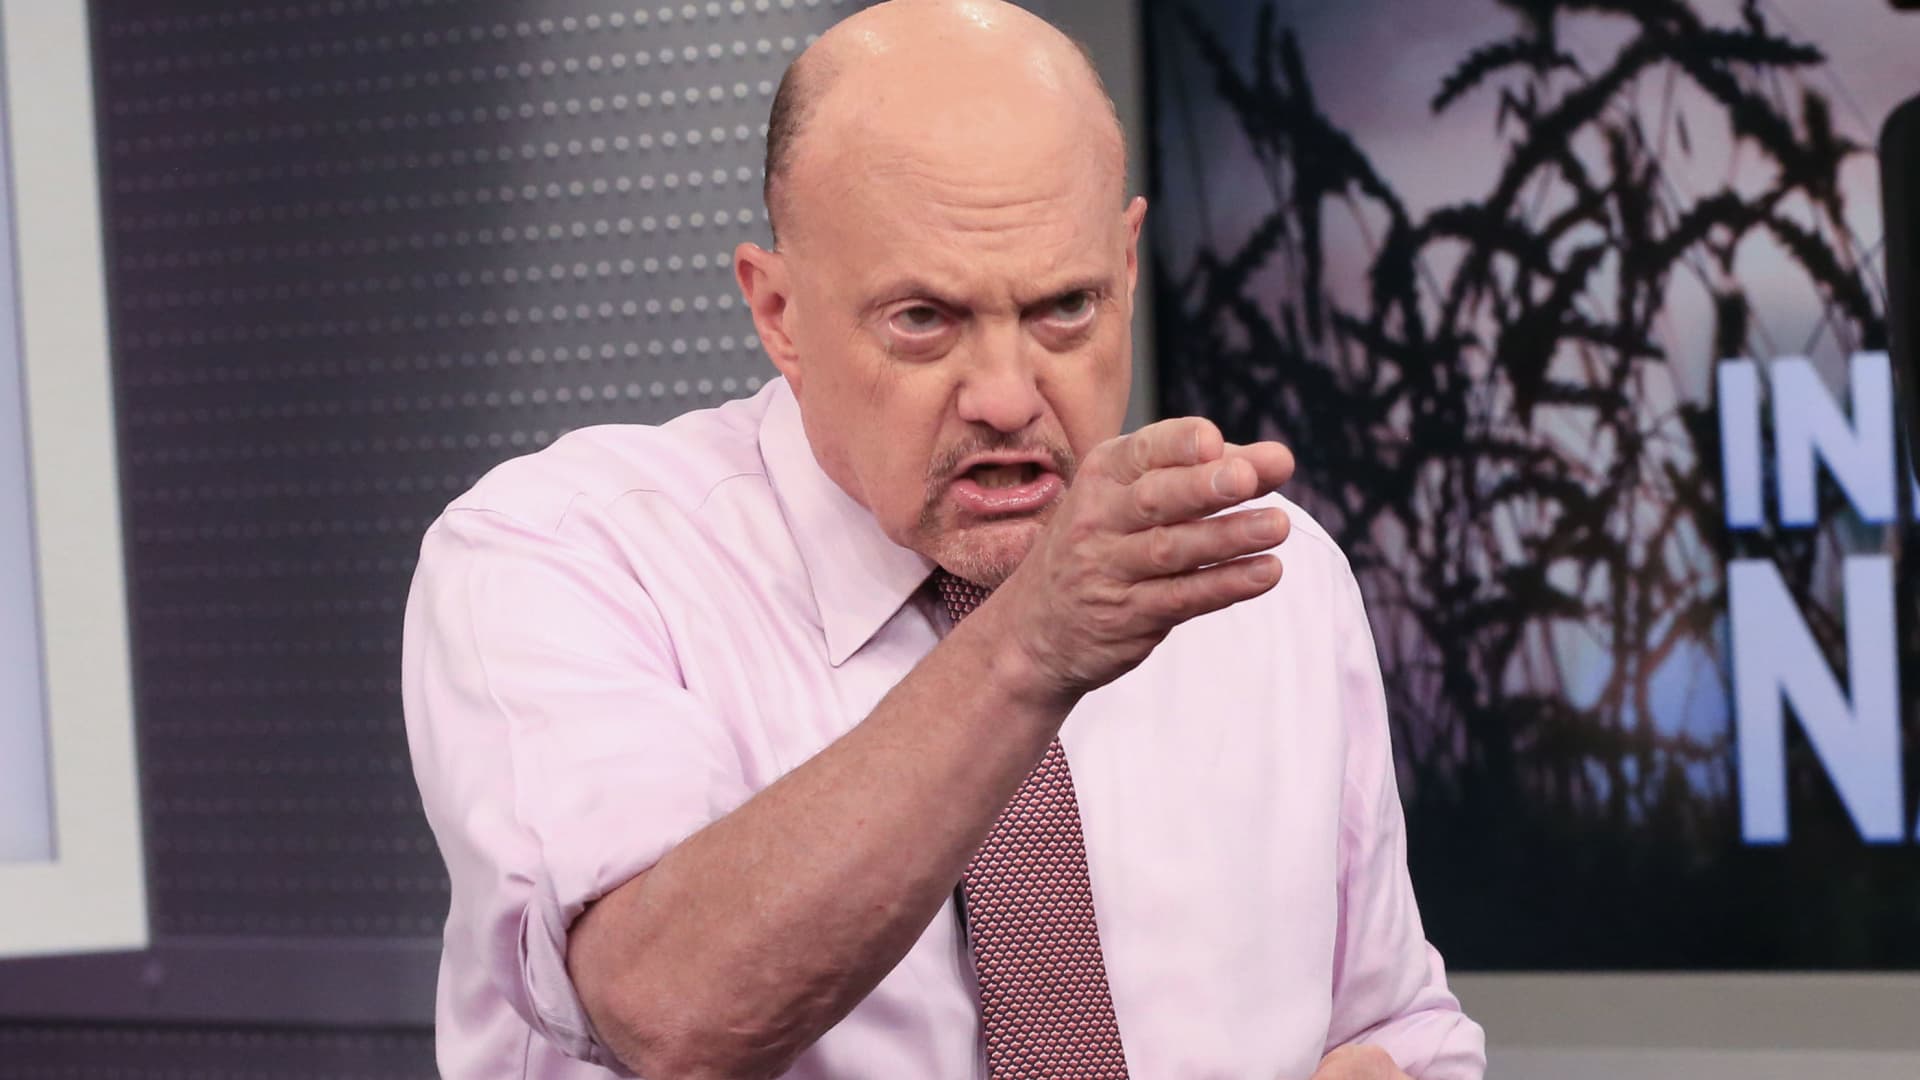 Jim Cramer says strong January jobs report shows the economy can handle more rate hikes